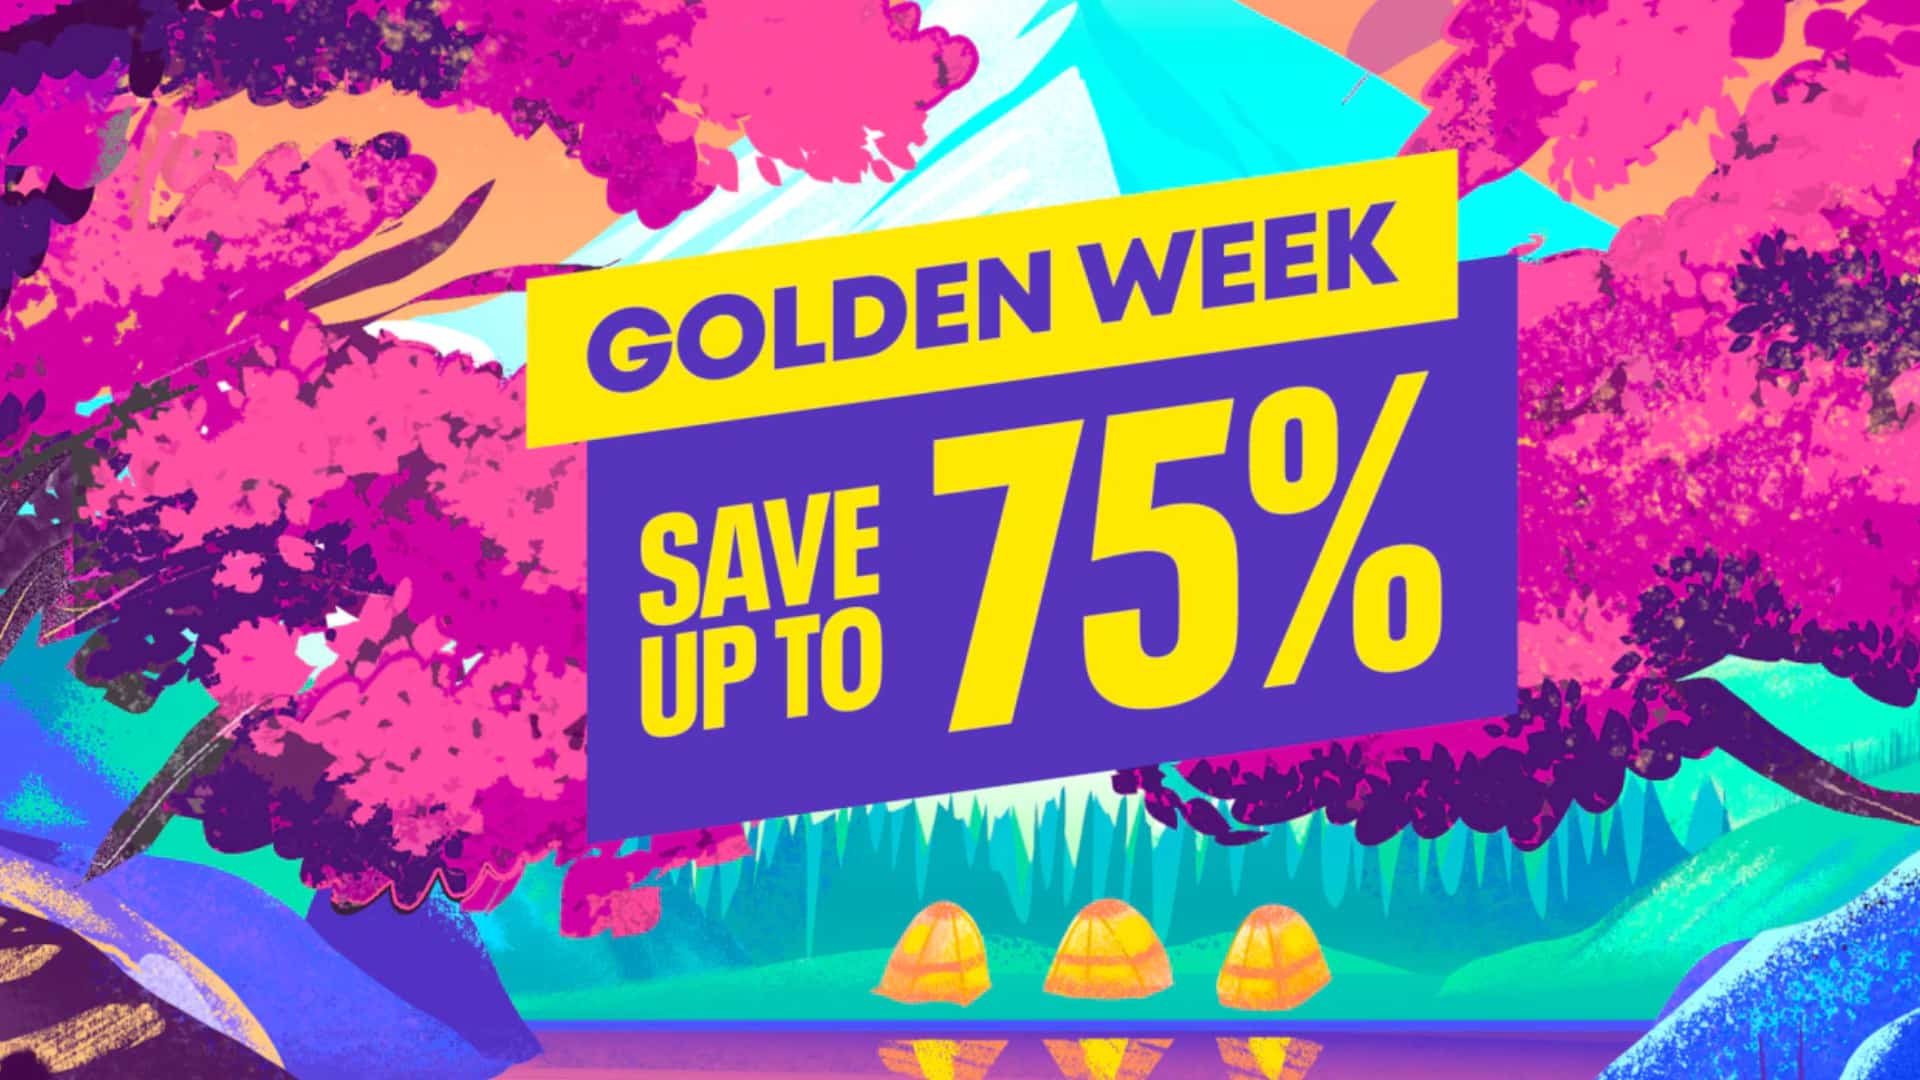 PlayStation Store Golden Week Sale Now Live